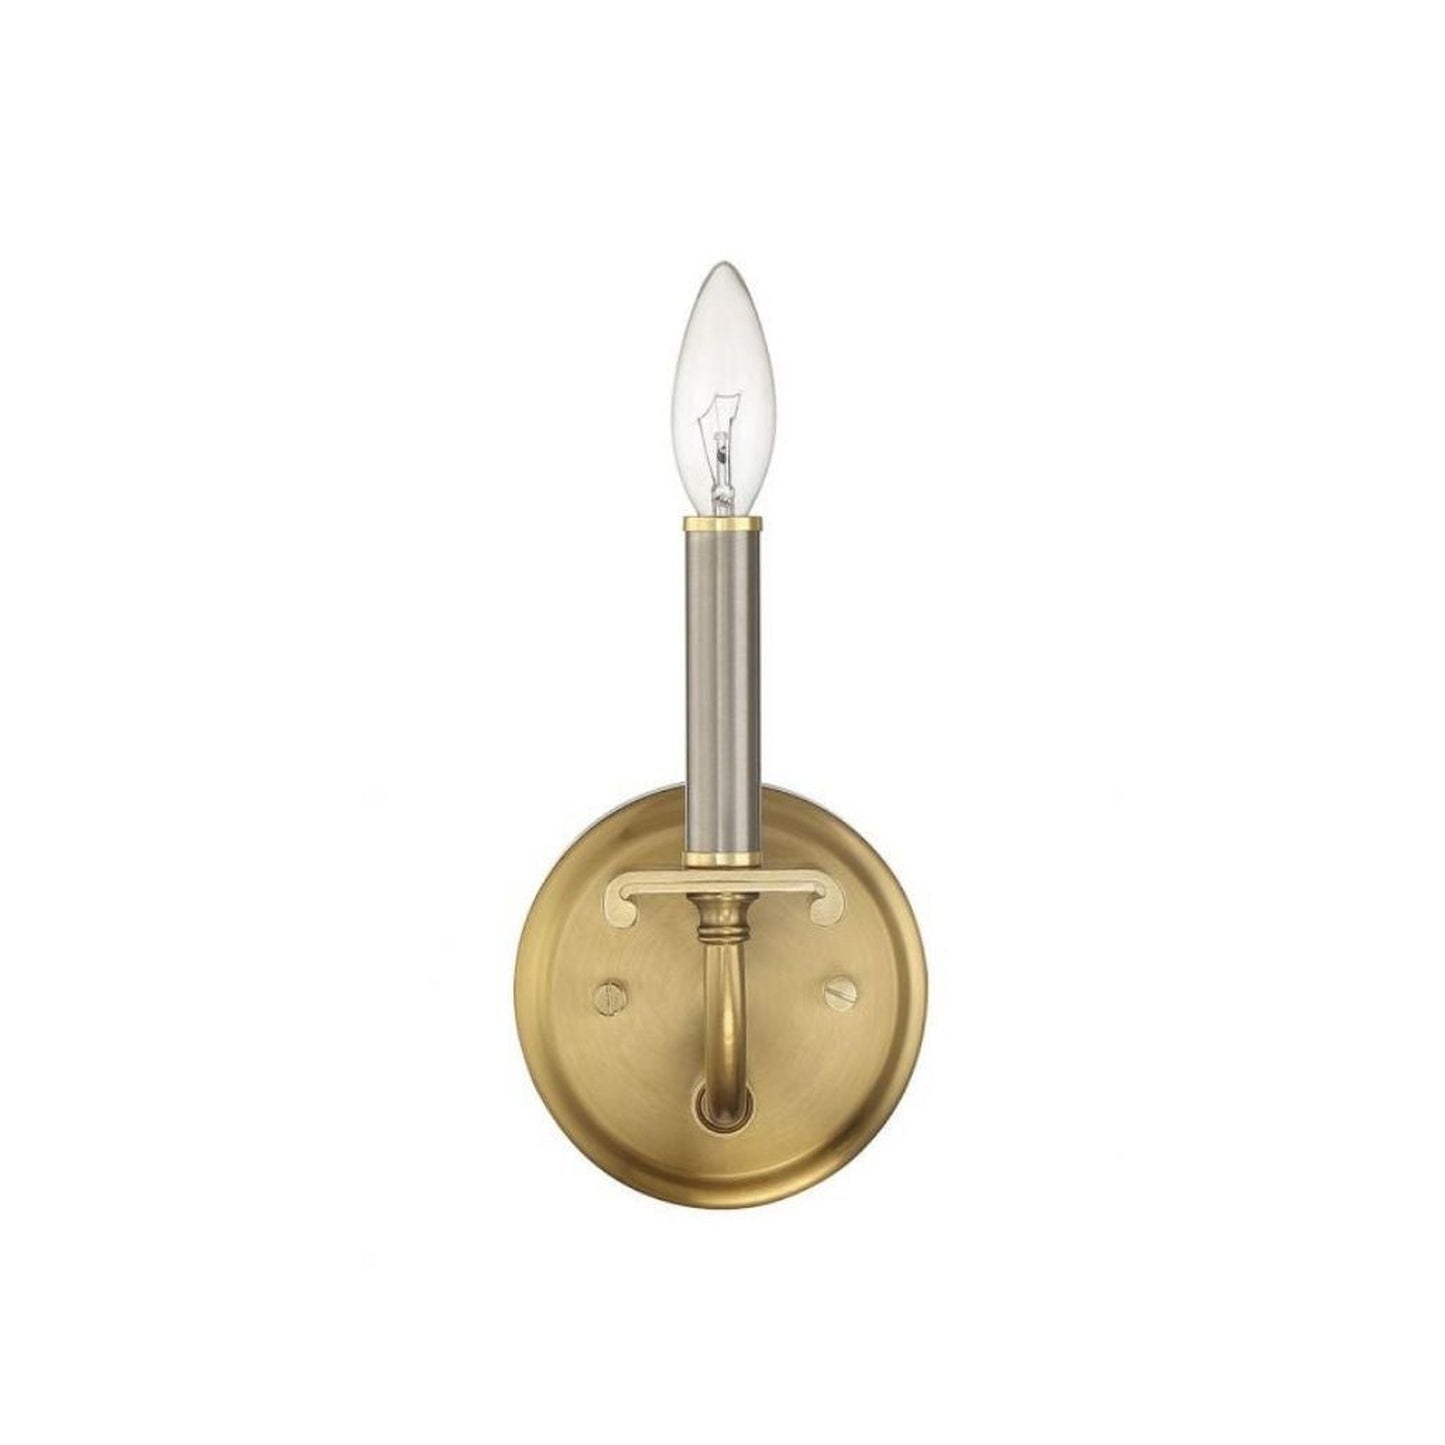 Craftmade Stanza 5" x 8" 1-Light Brushed Polished Nickel and Satin Brass Candle-style Wall Sconce